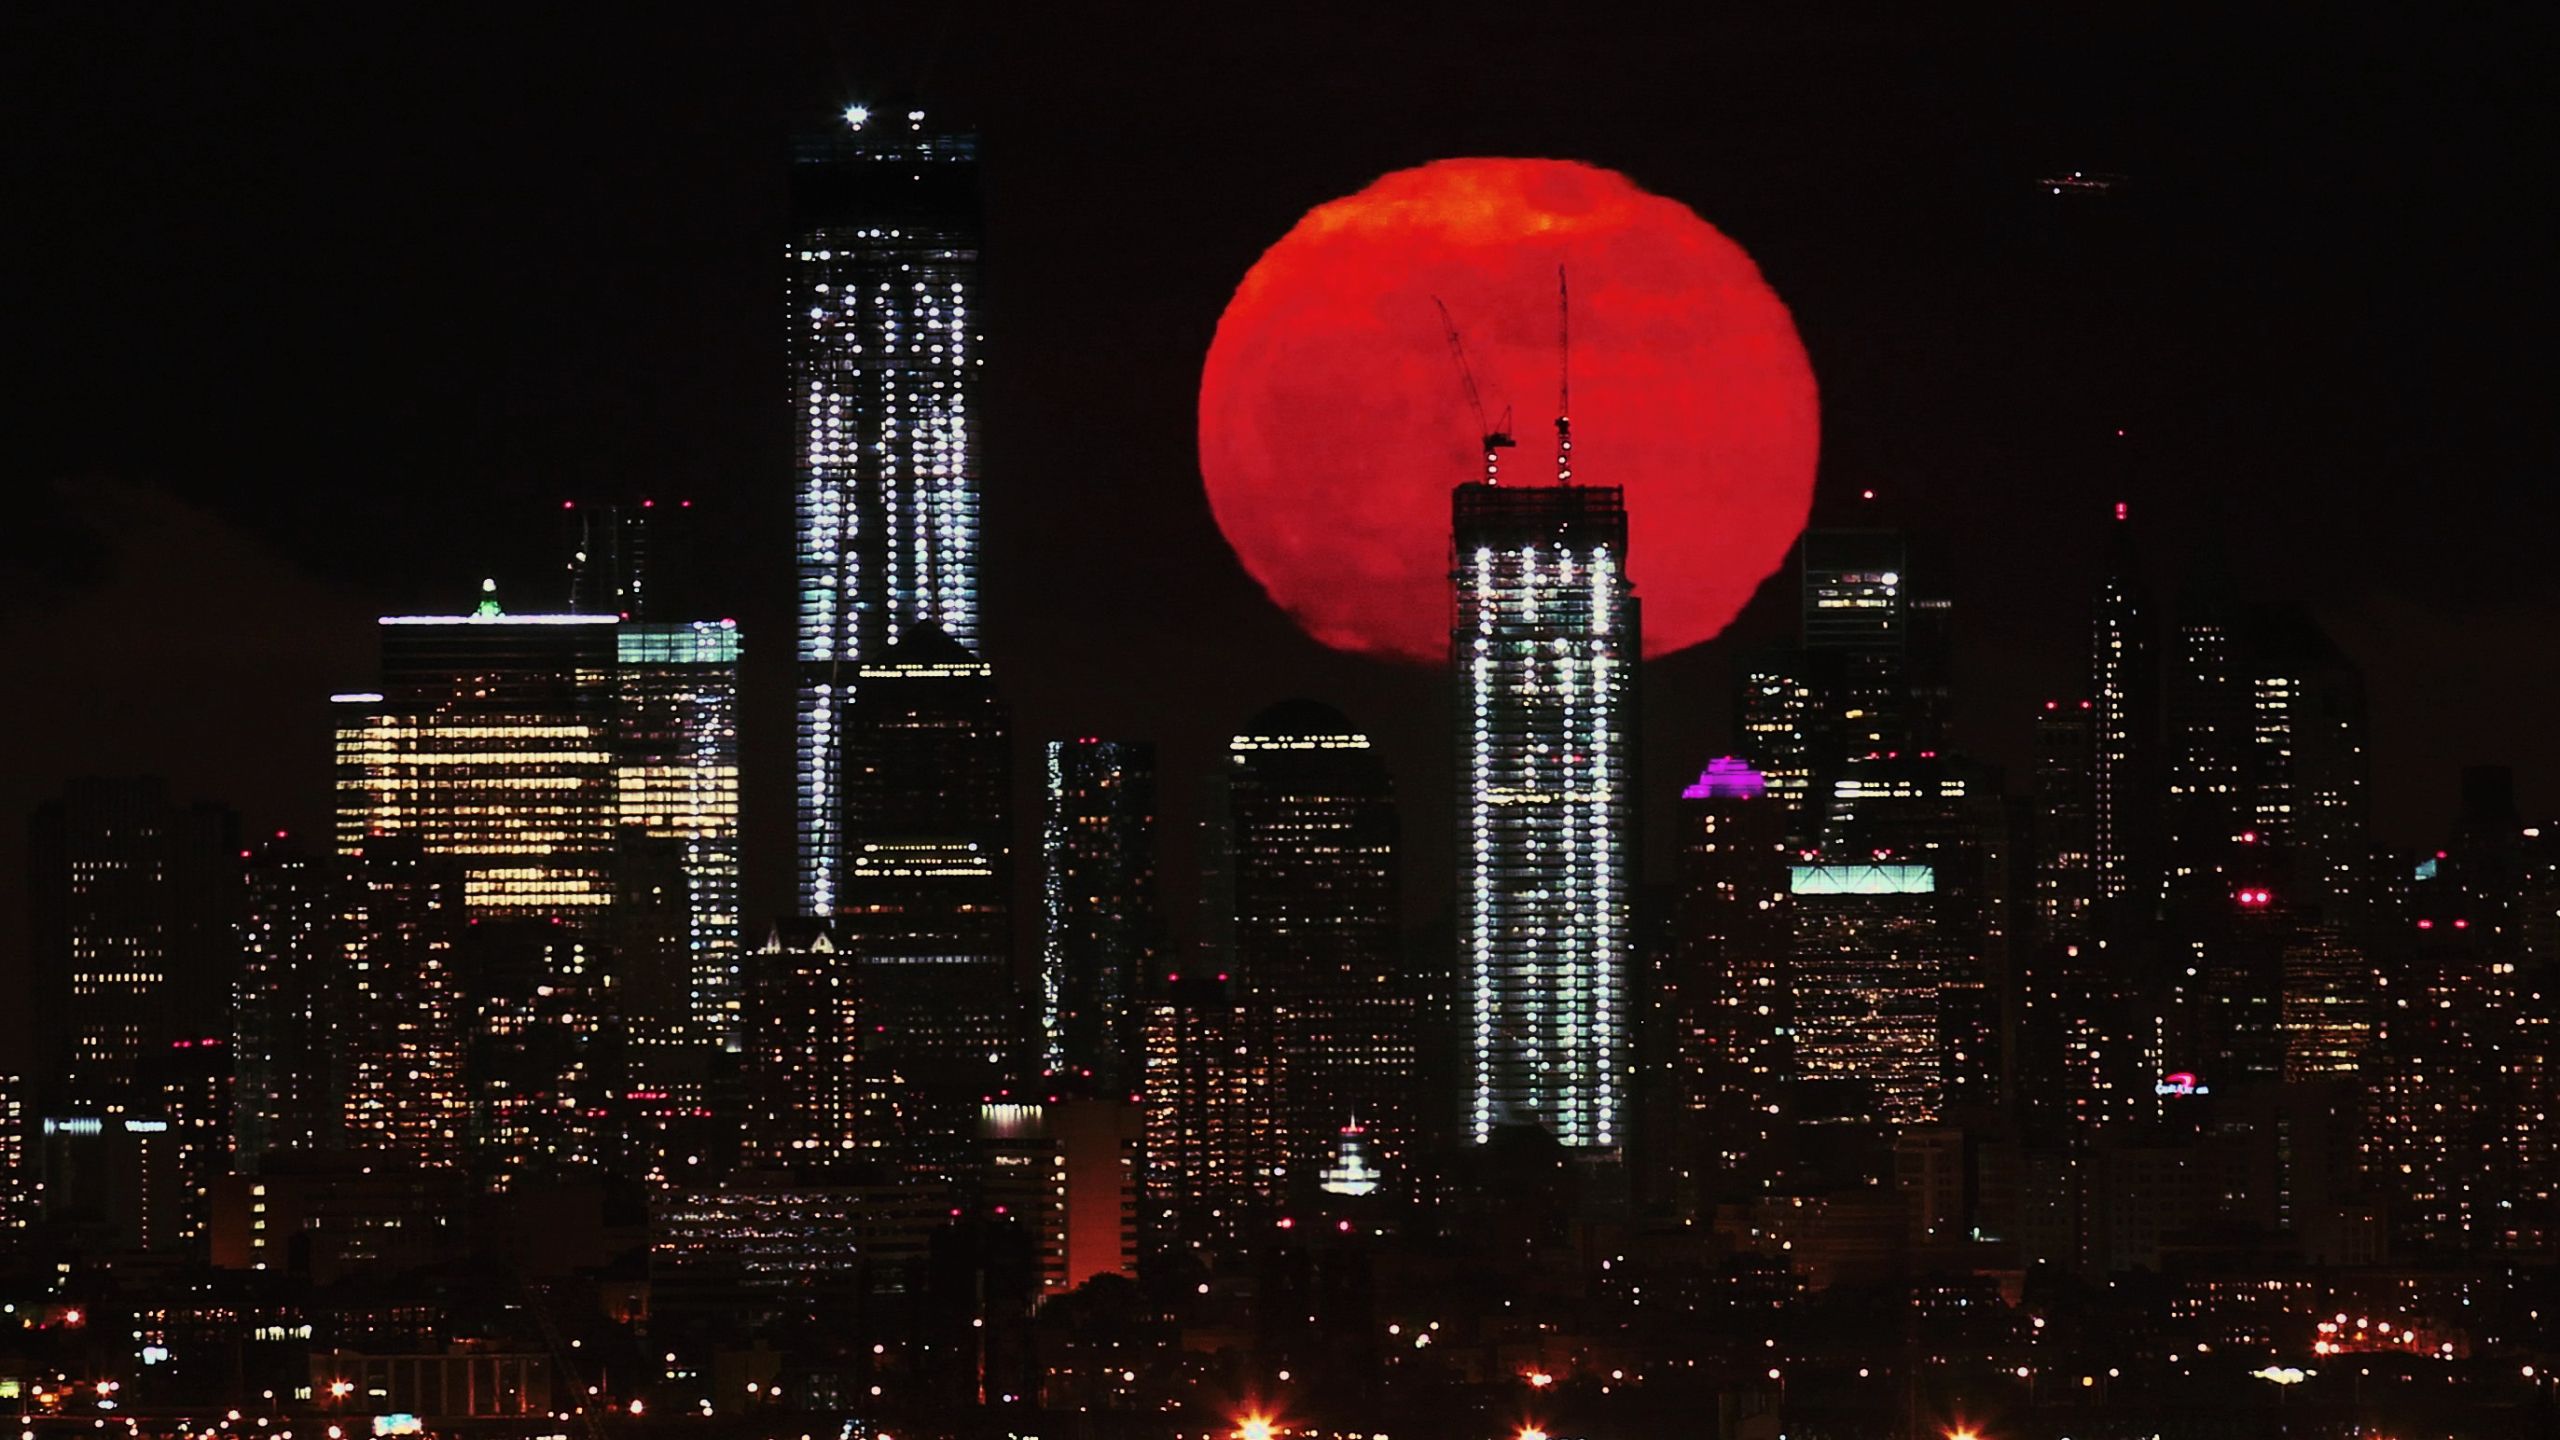 Red Moon Over City 1440P Resolution Wallpaper, HD City 4K Wallpaper, Image, Photo and Background